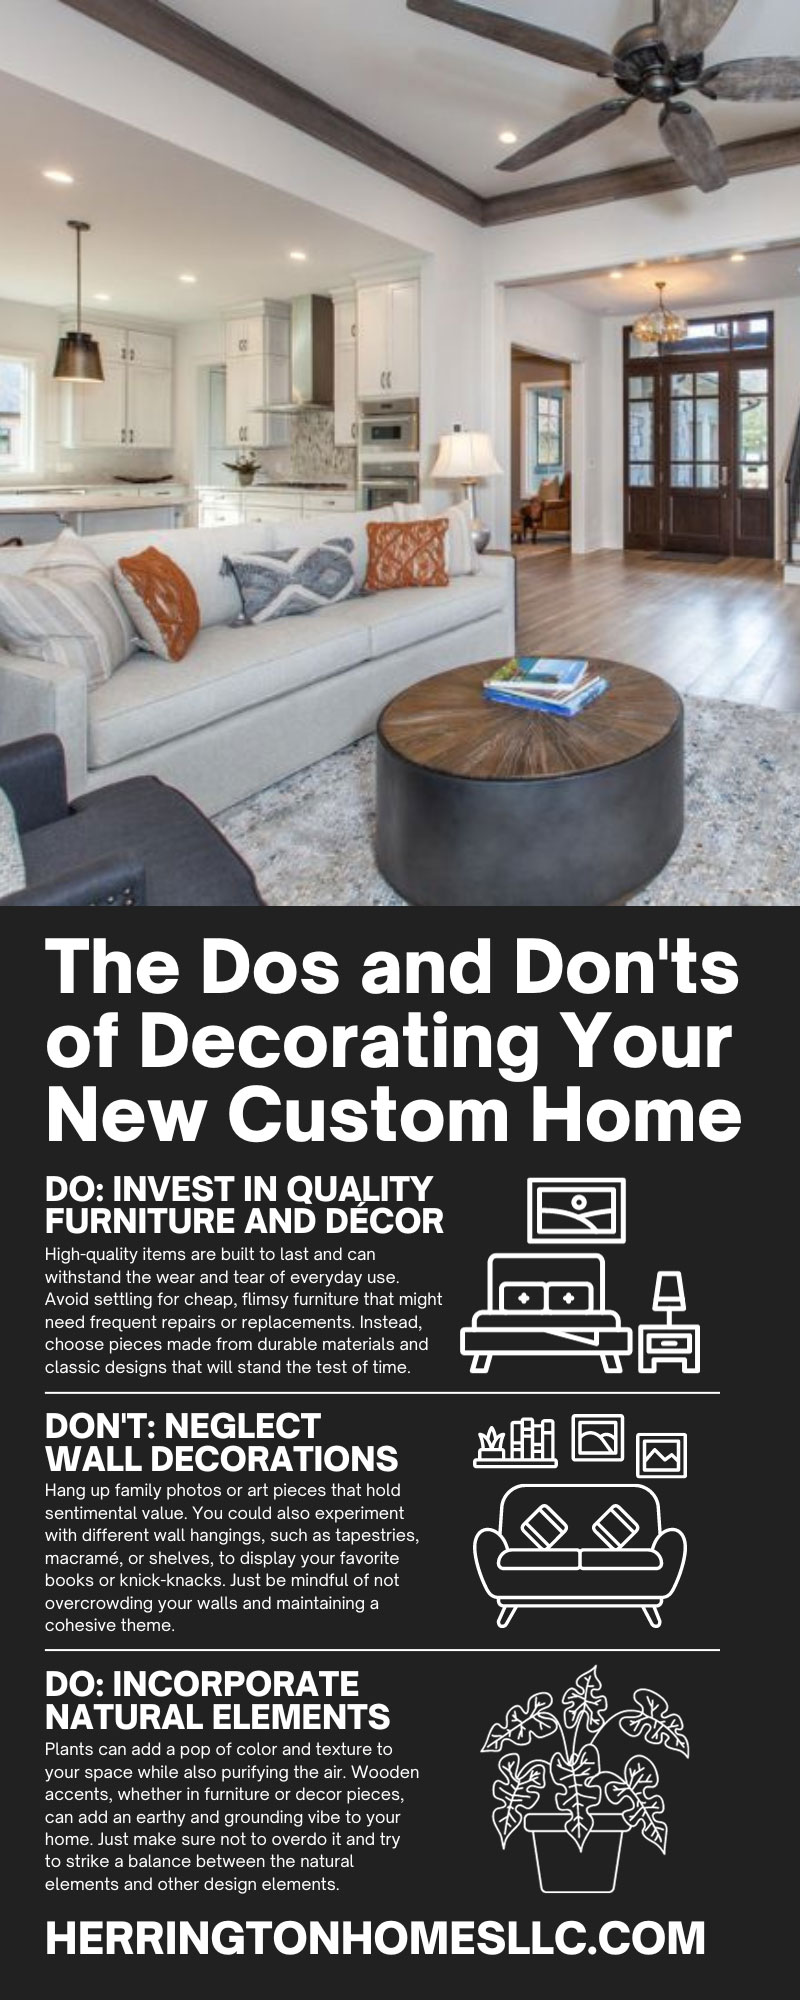 The Dos and Don'ts of Decorating Your New Custom Home